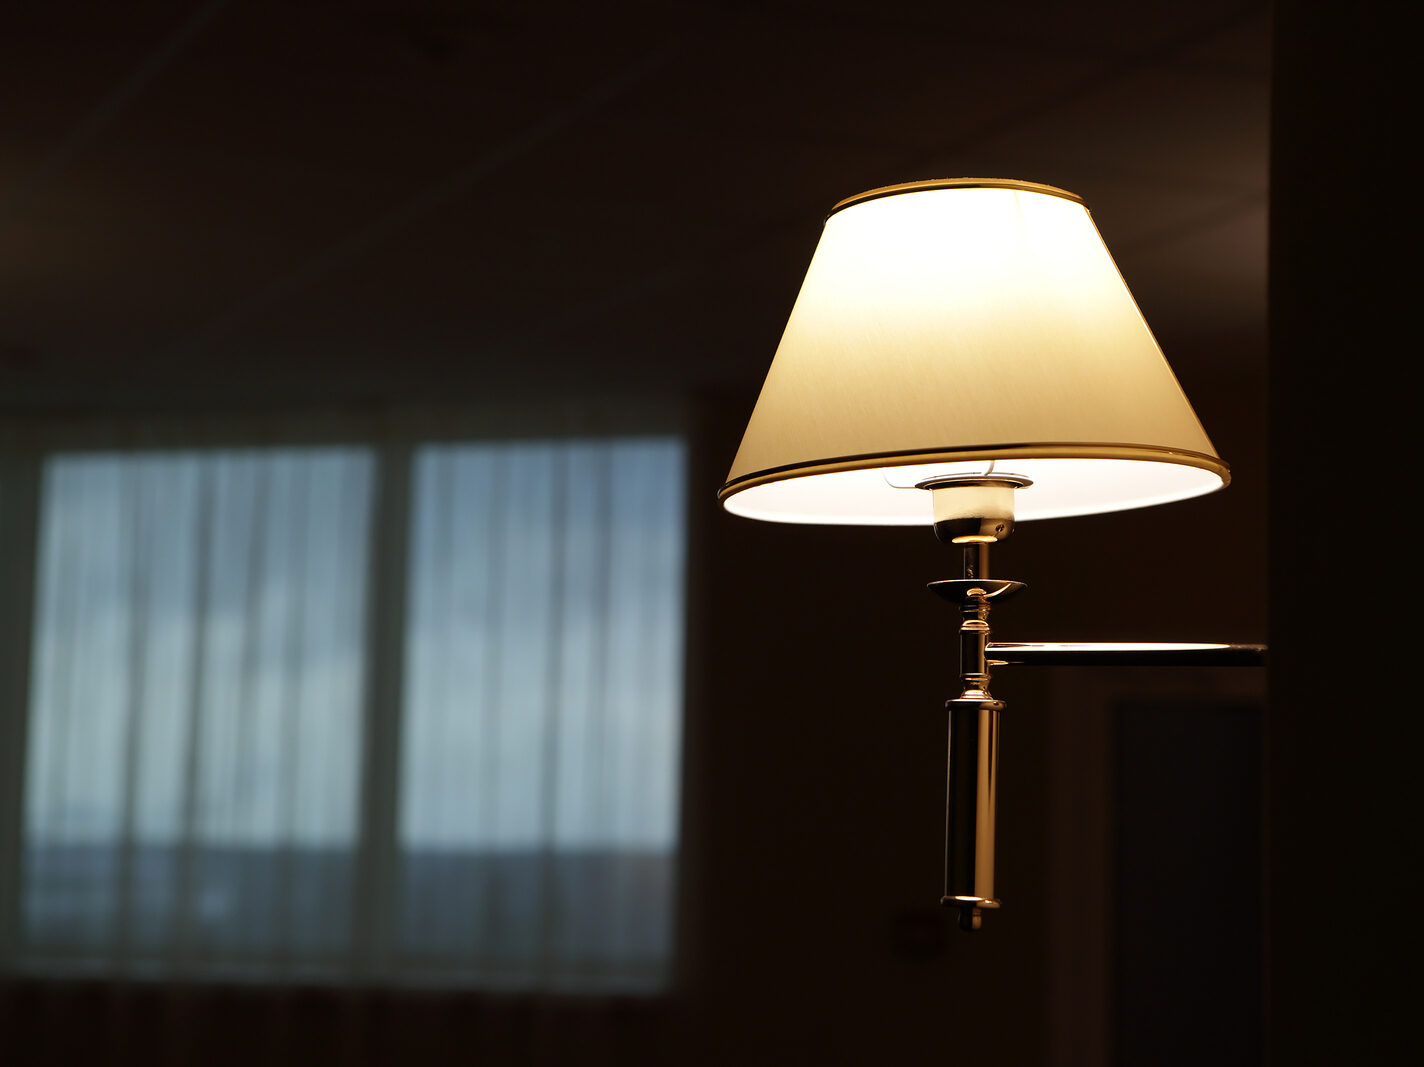 A stand lamp with the light on in a dark living room.